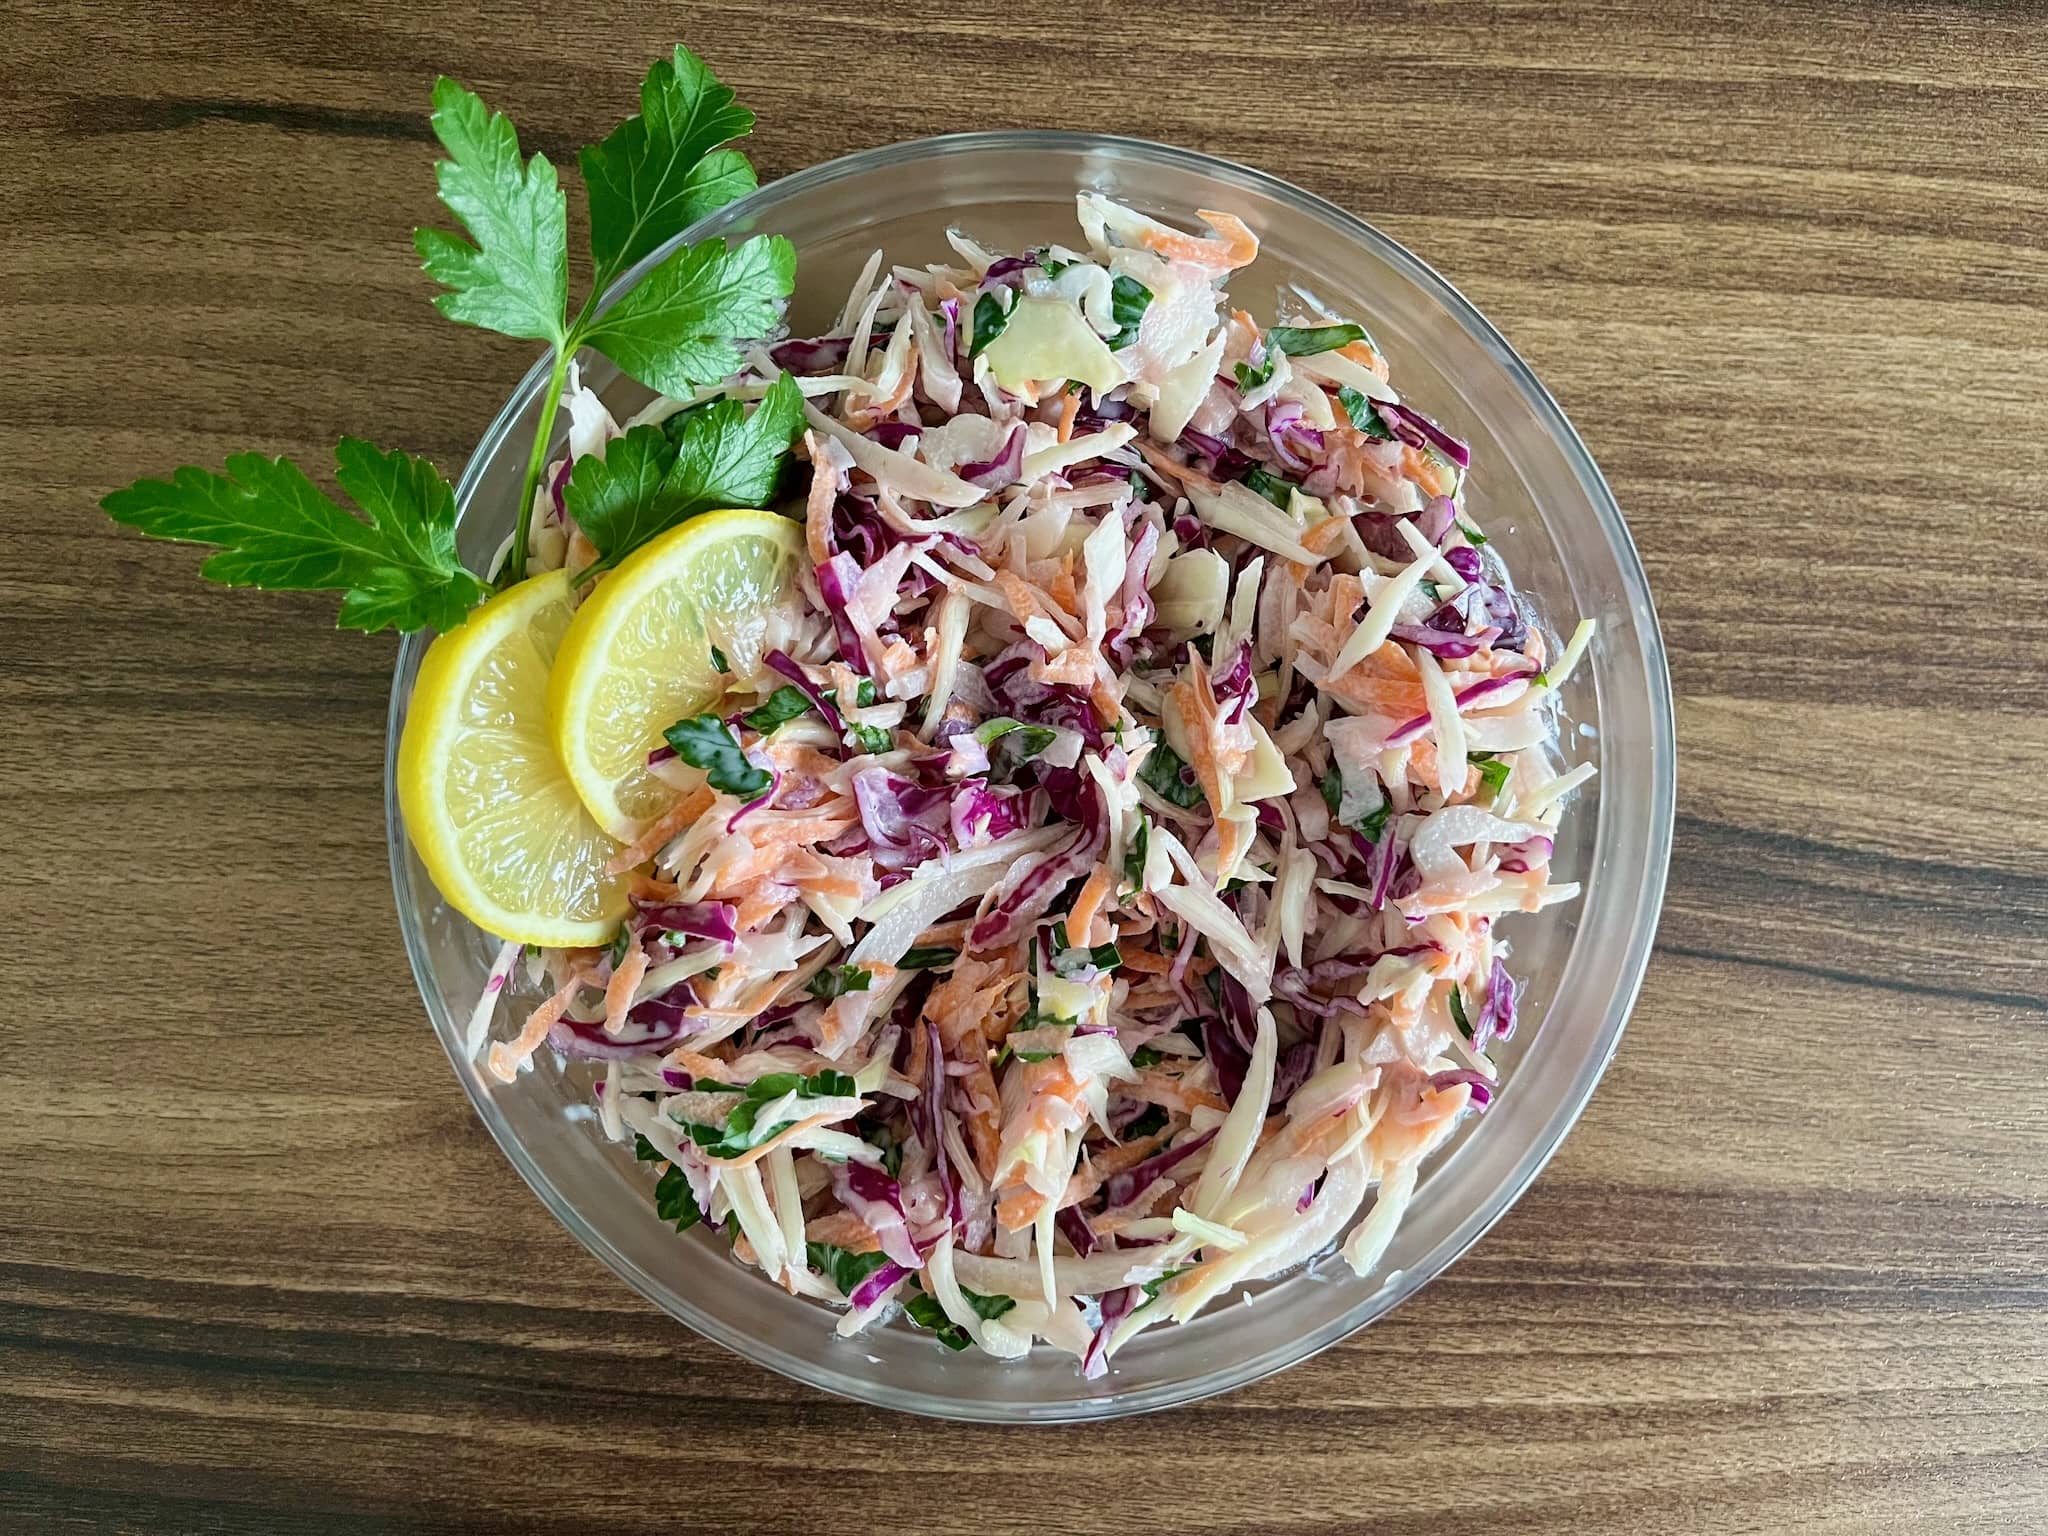 Just Perfect Coleslaw